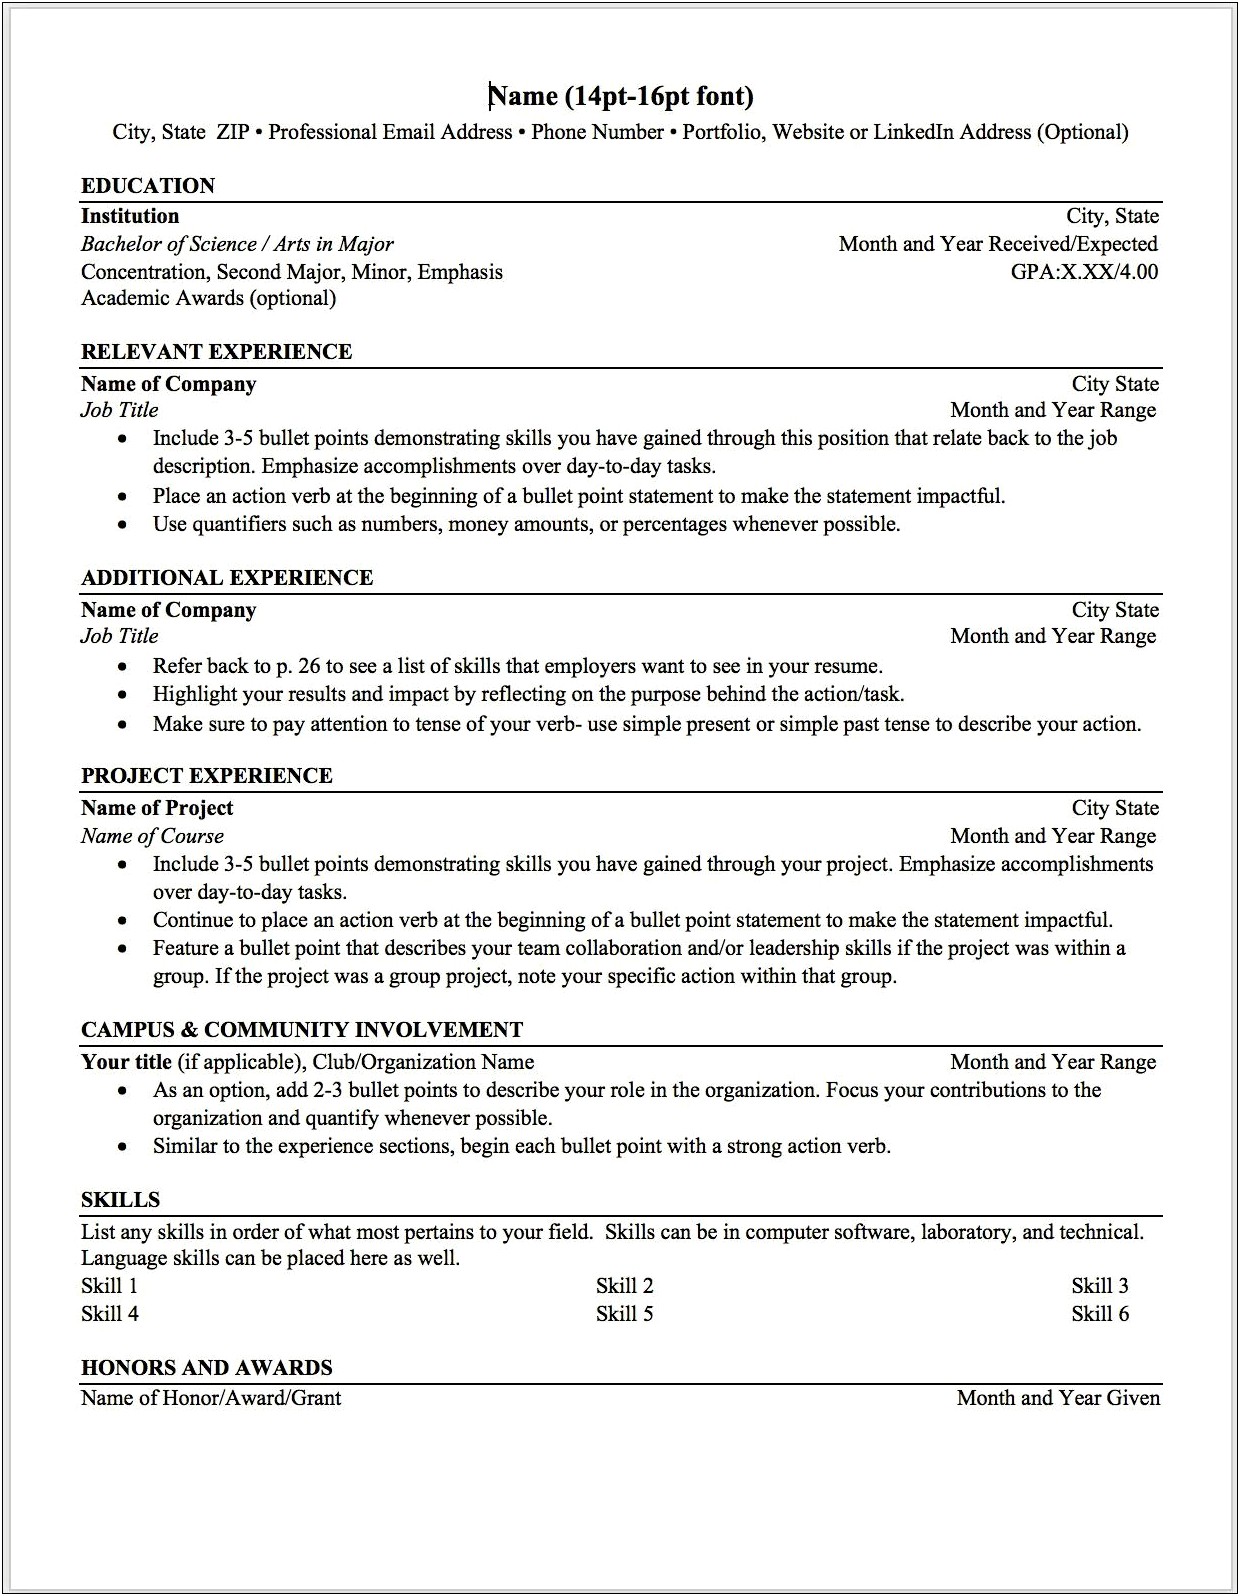 Samples Of Things To Put On Federal Resume